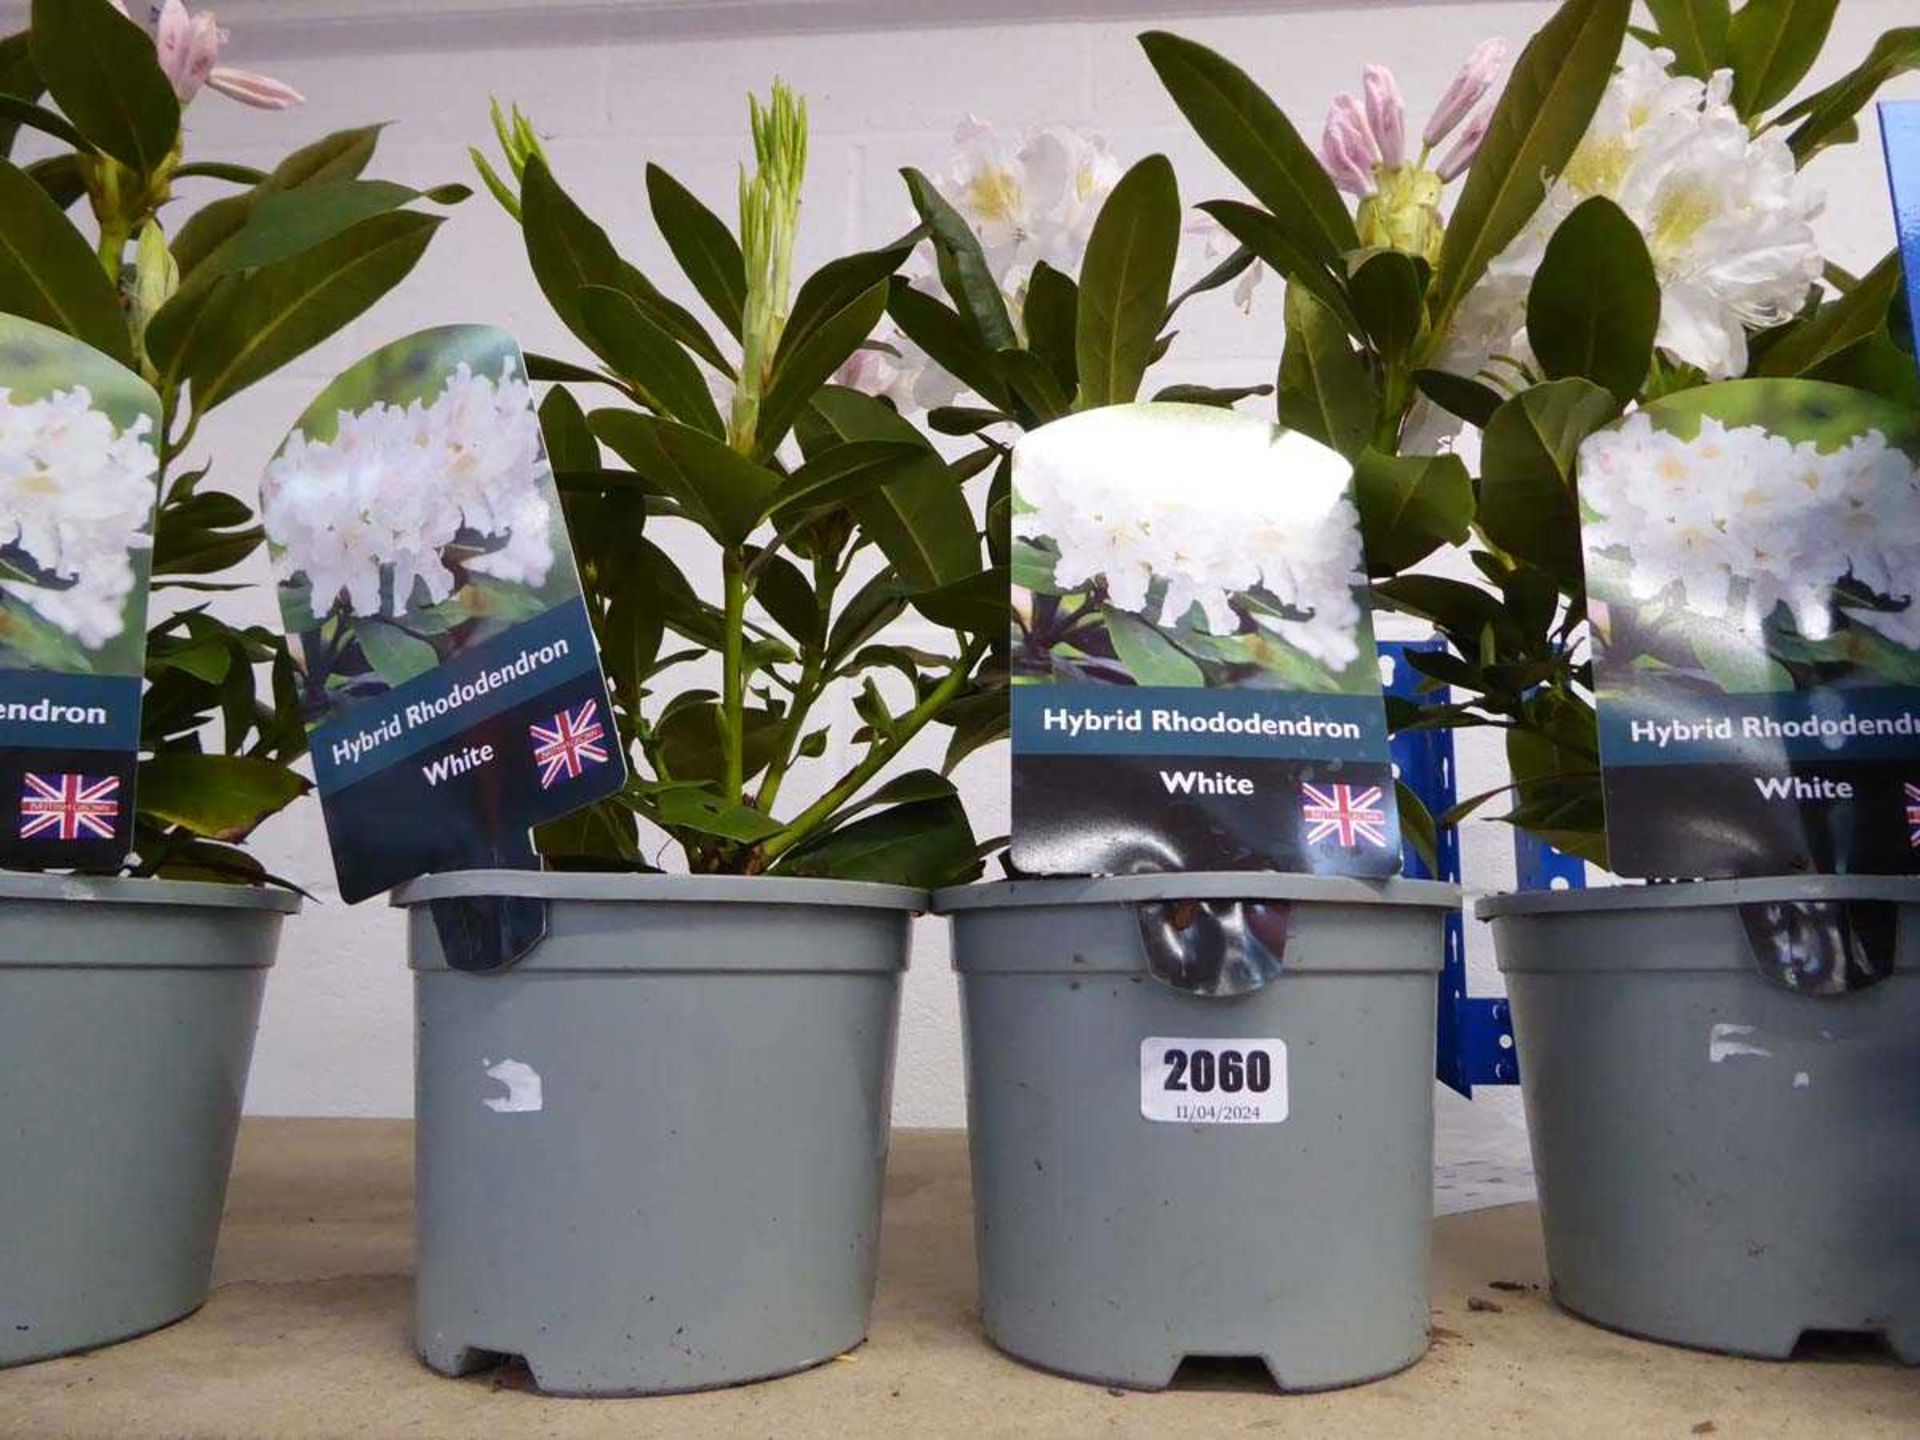 2 potted hybrid rhododendrons in white